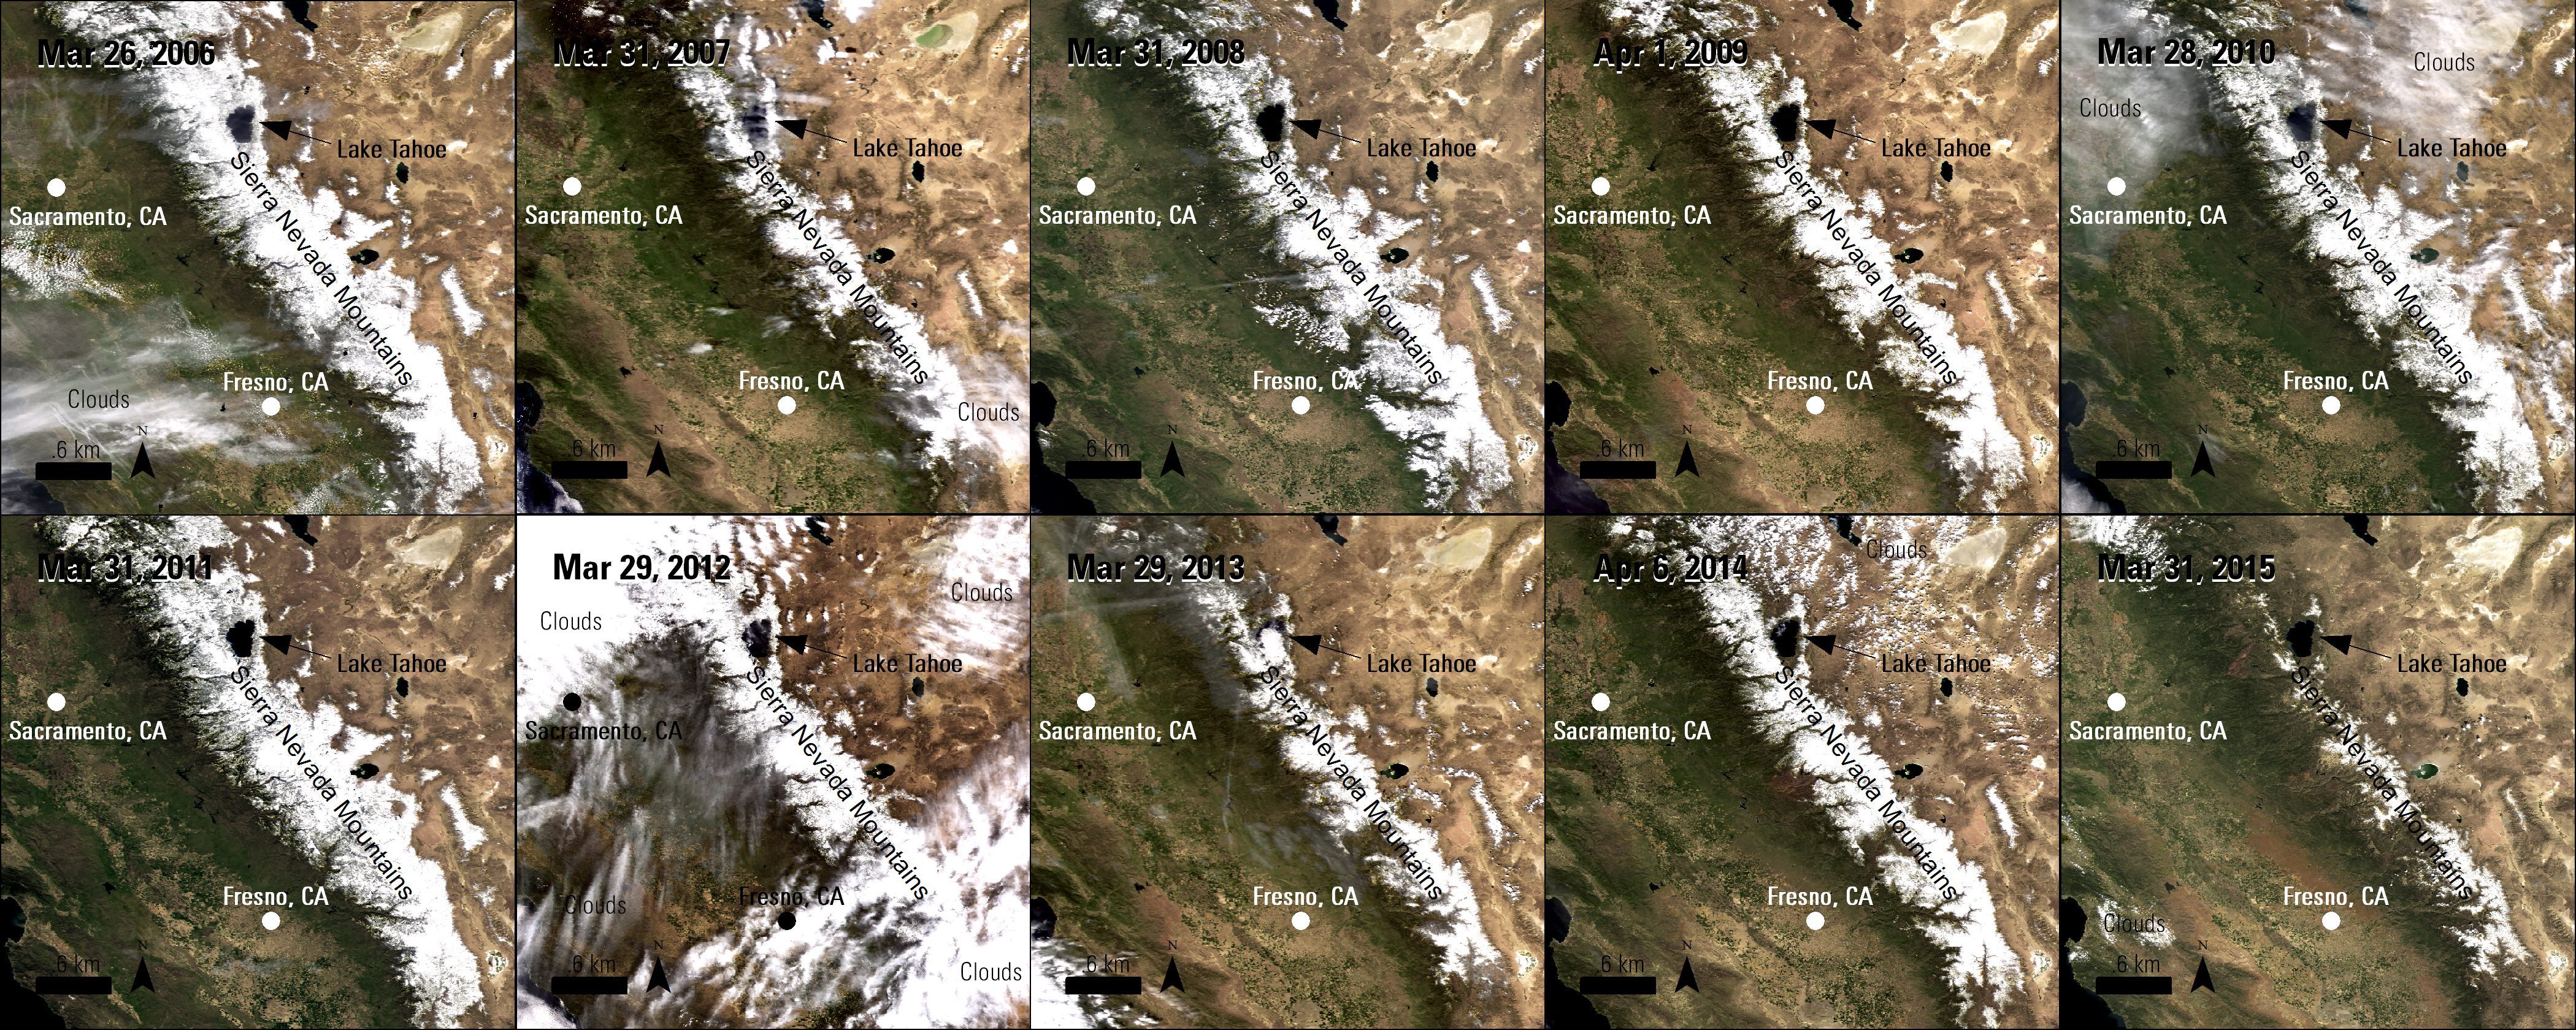 Remote Sensing Helps Observe Drought in California